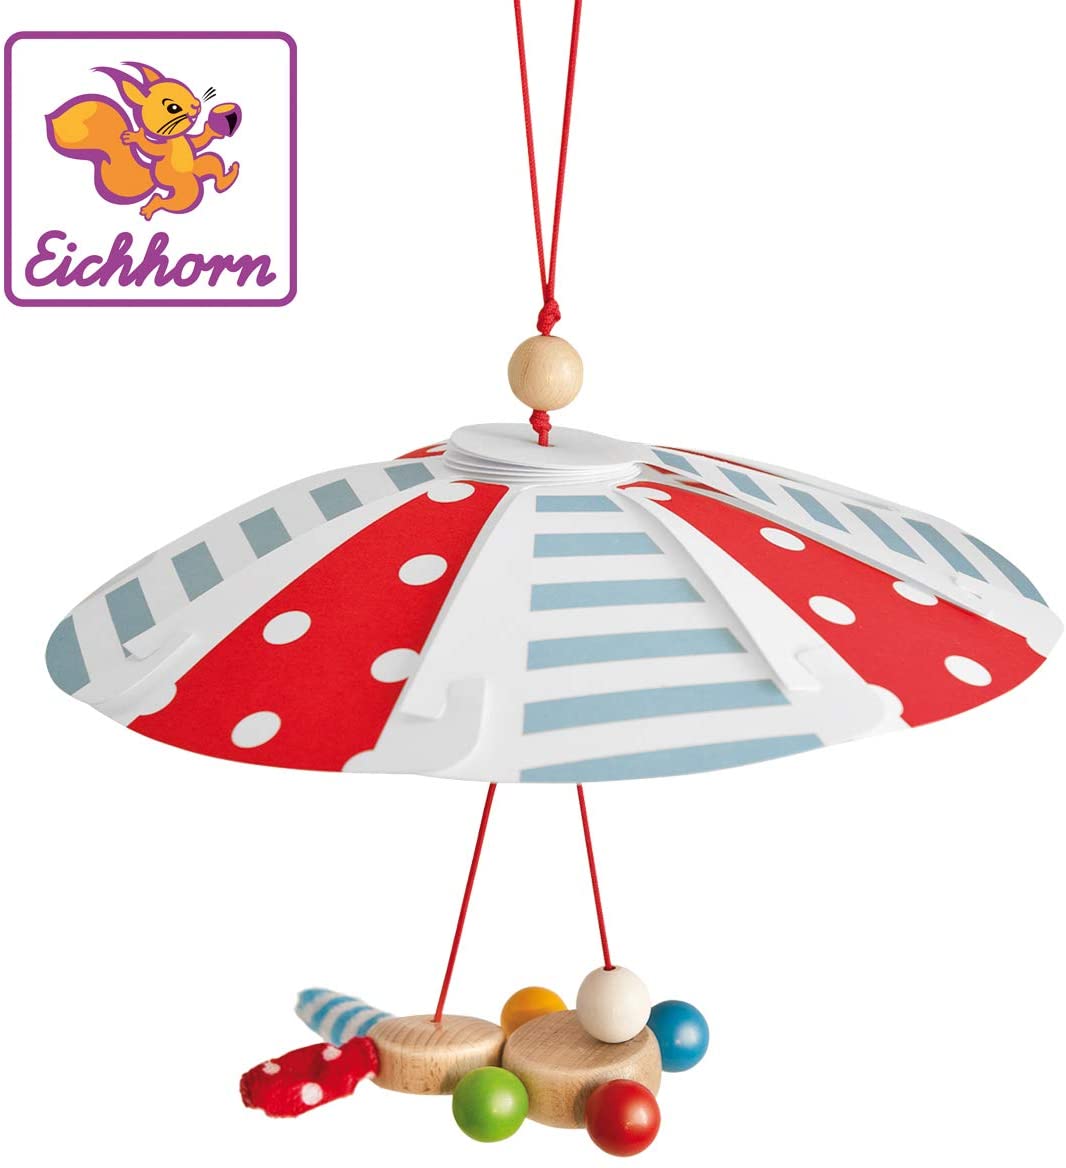 Eichhorn 100017029 Baby Mobile with Rabbit on Parachute, FSC 100% Certified Beech Wood